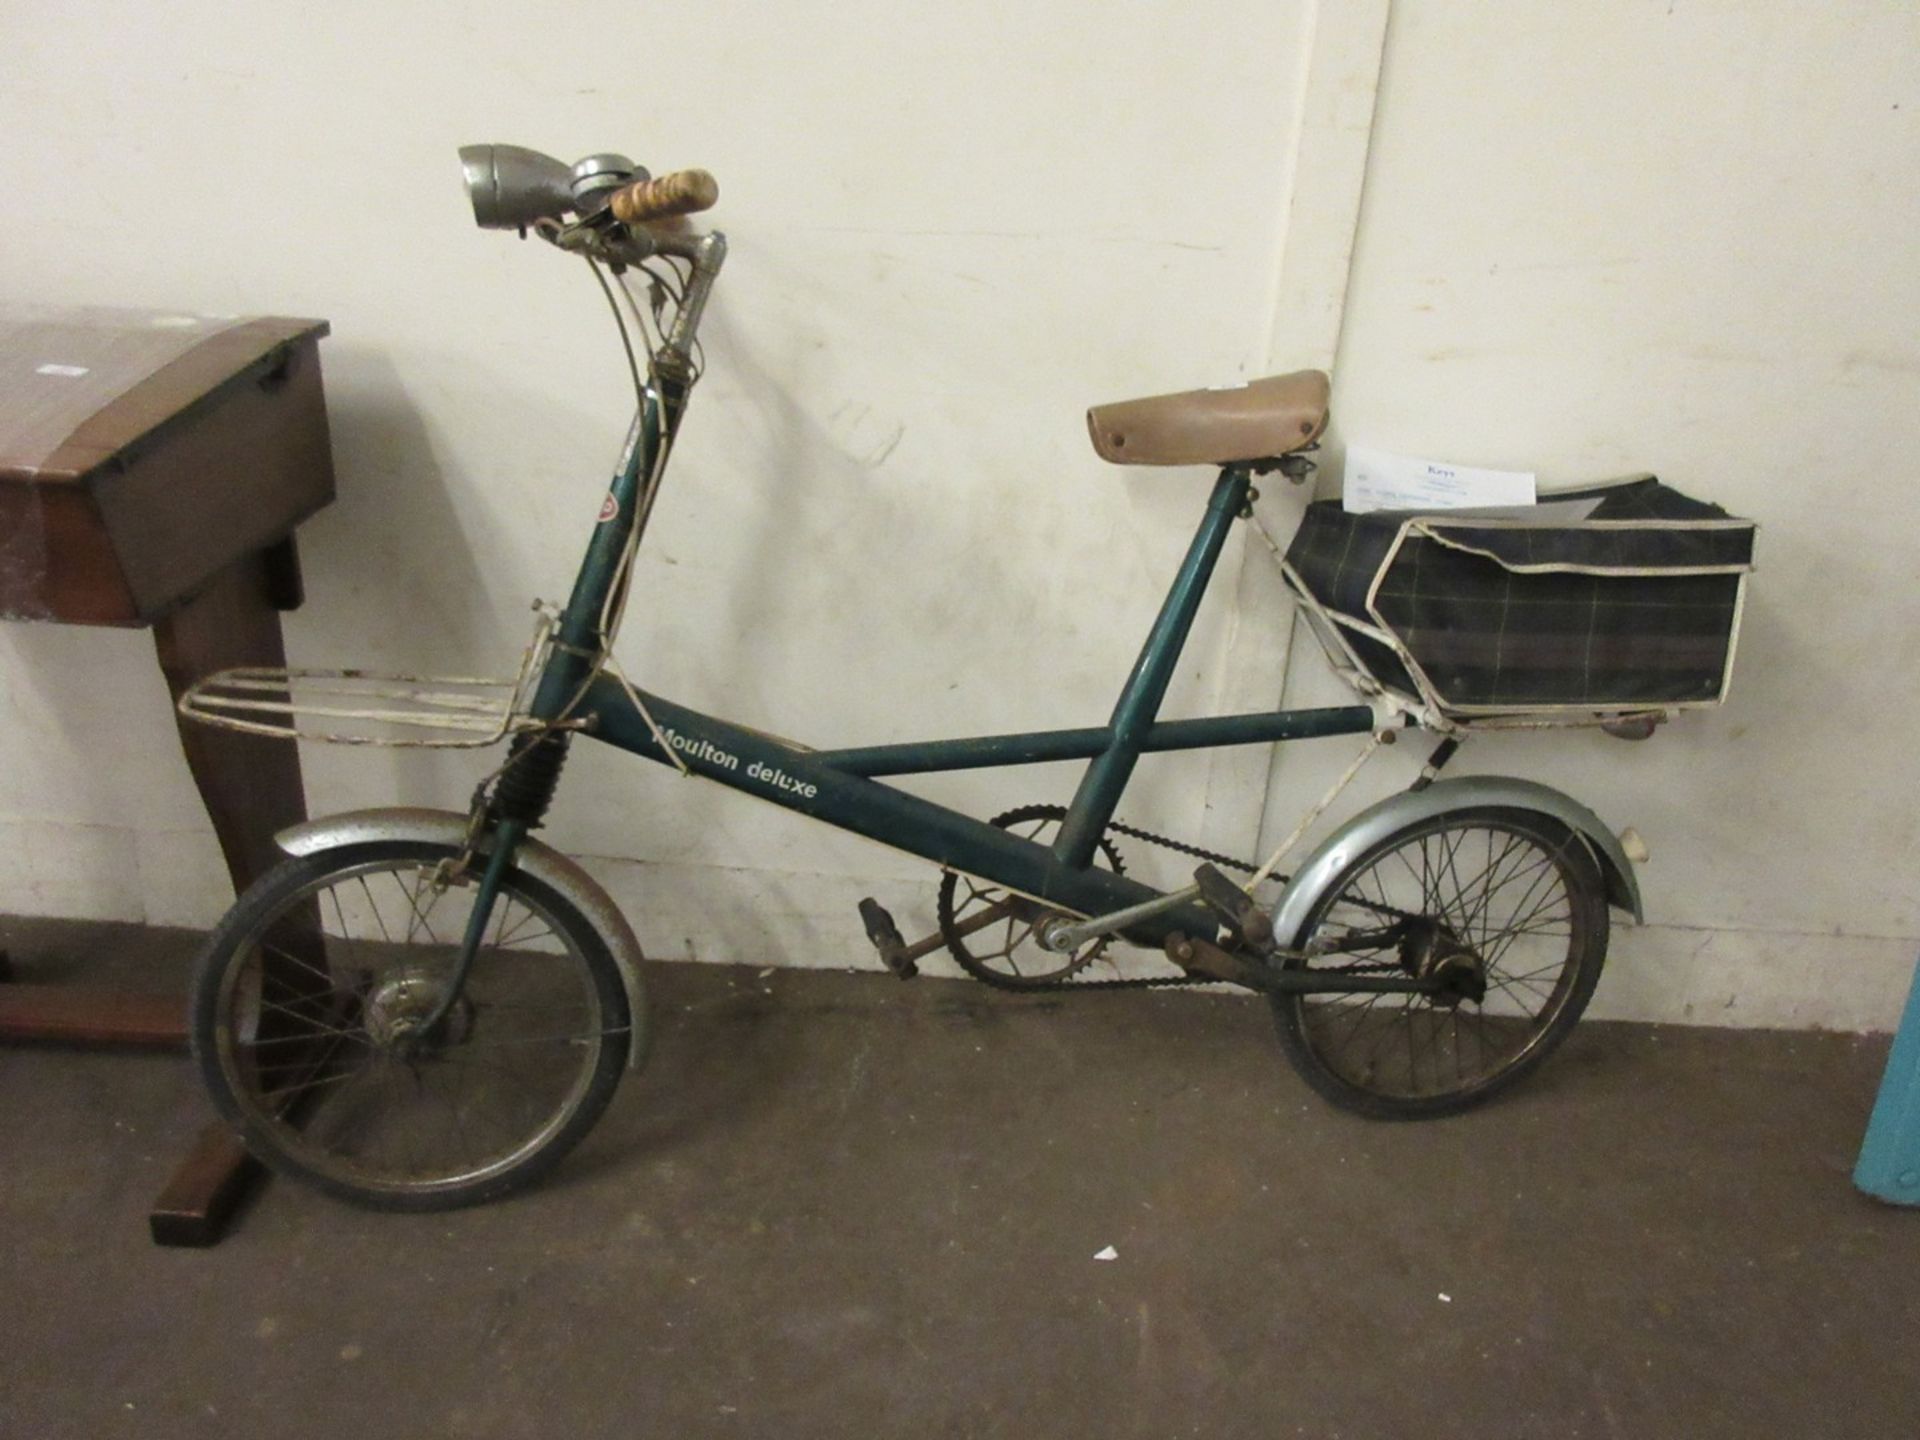 Moulton Deluxe Bicycle